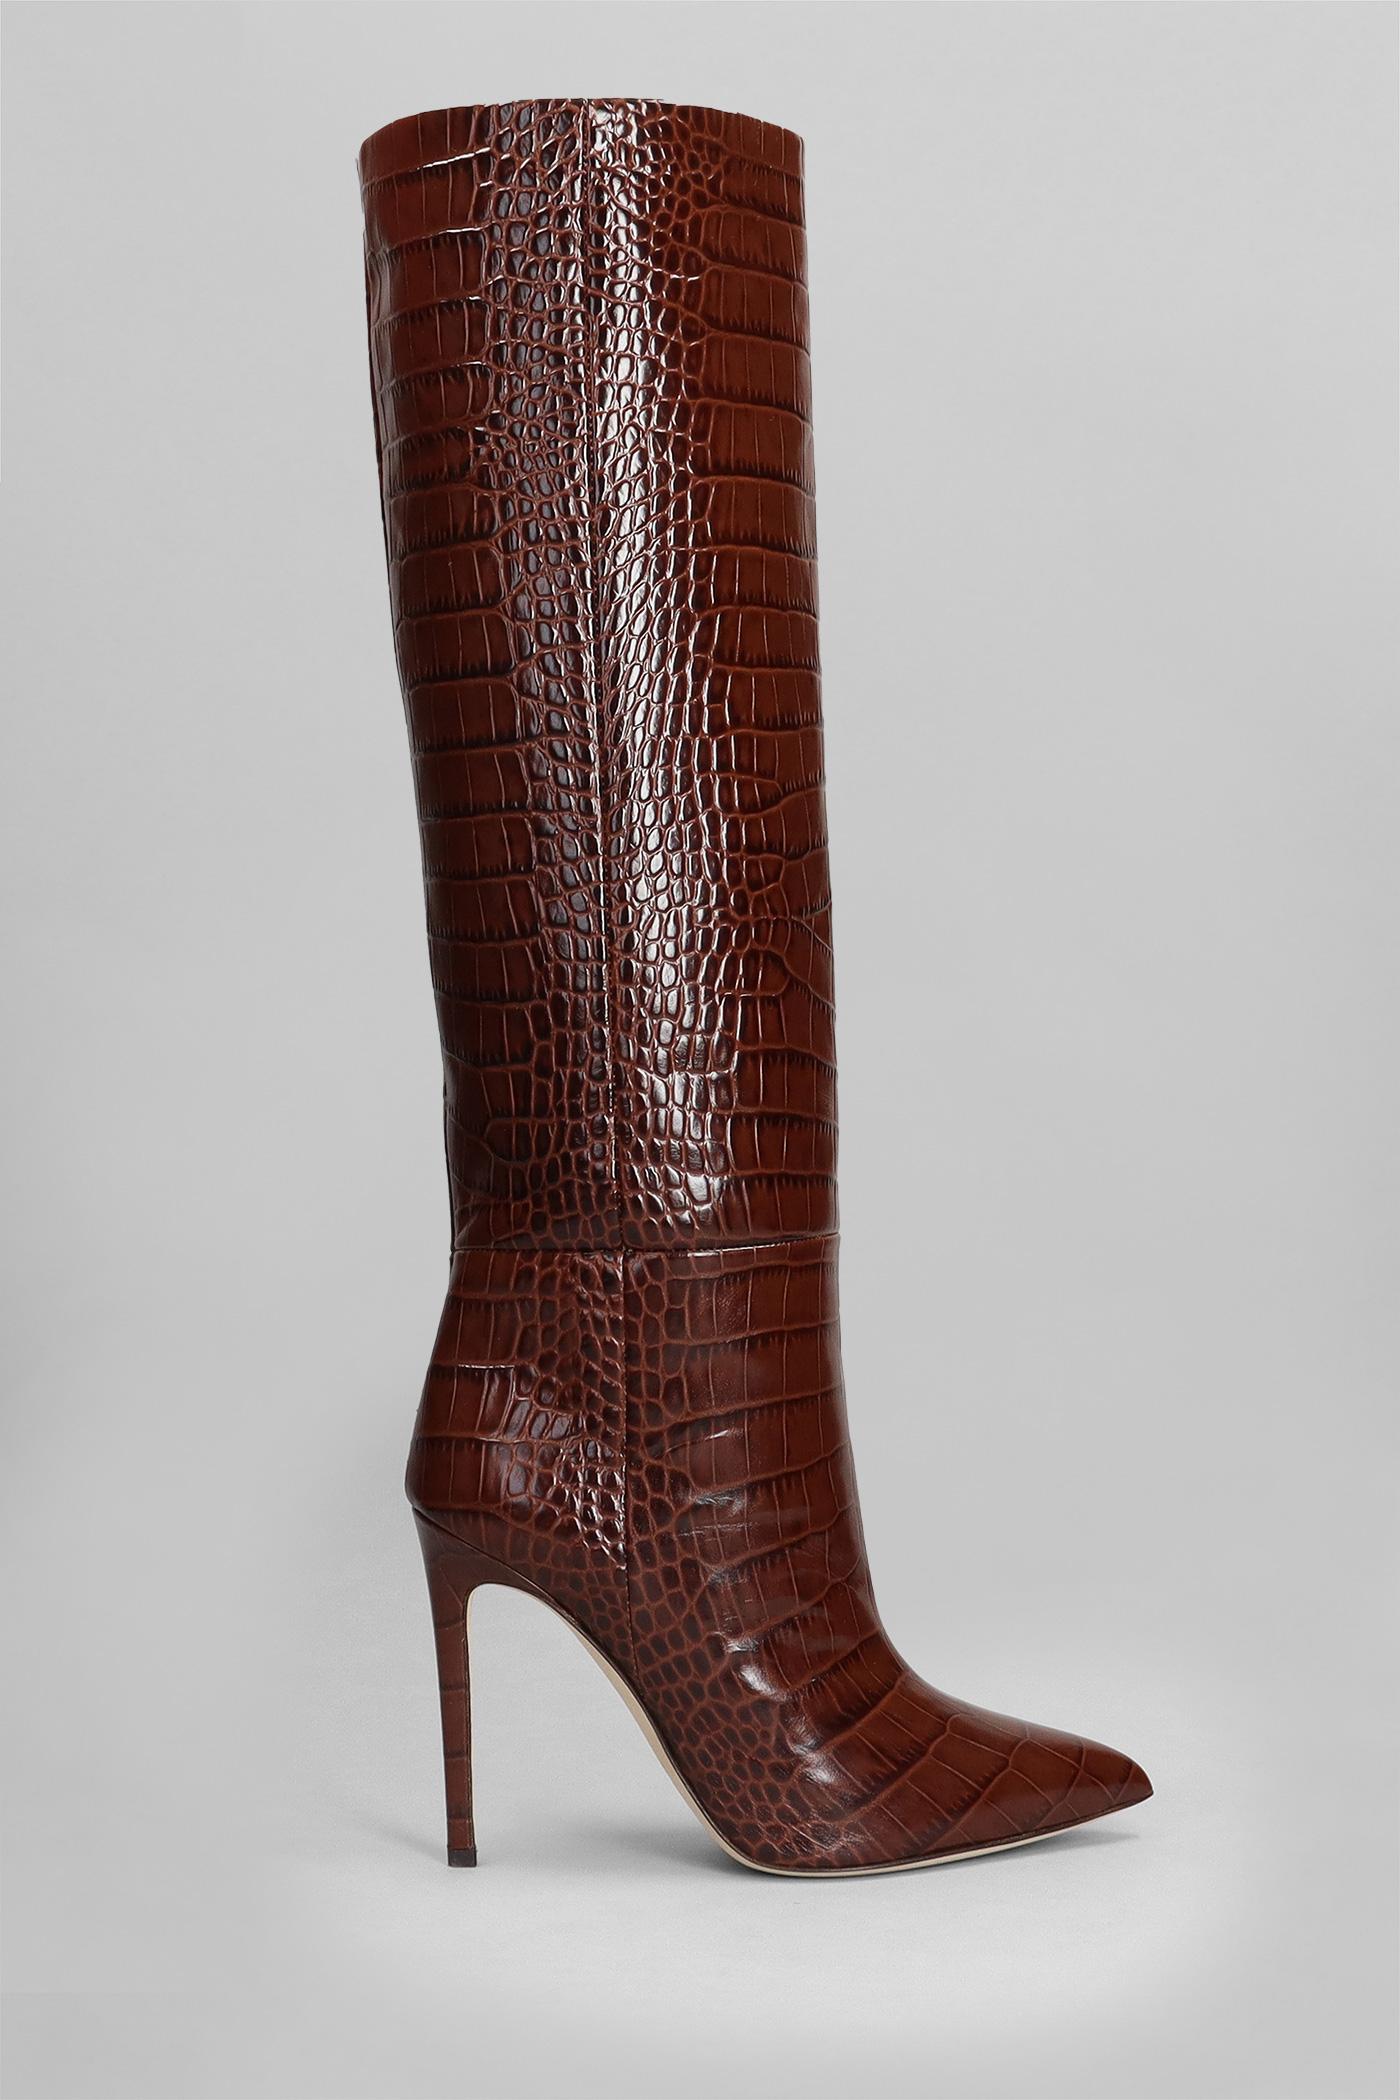 Paris Texas High Heels Boots In Brown Leather | Lyst